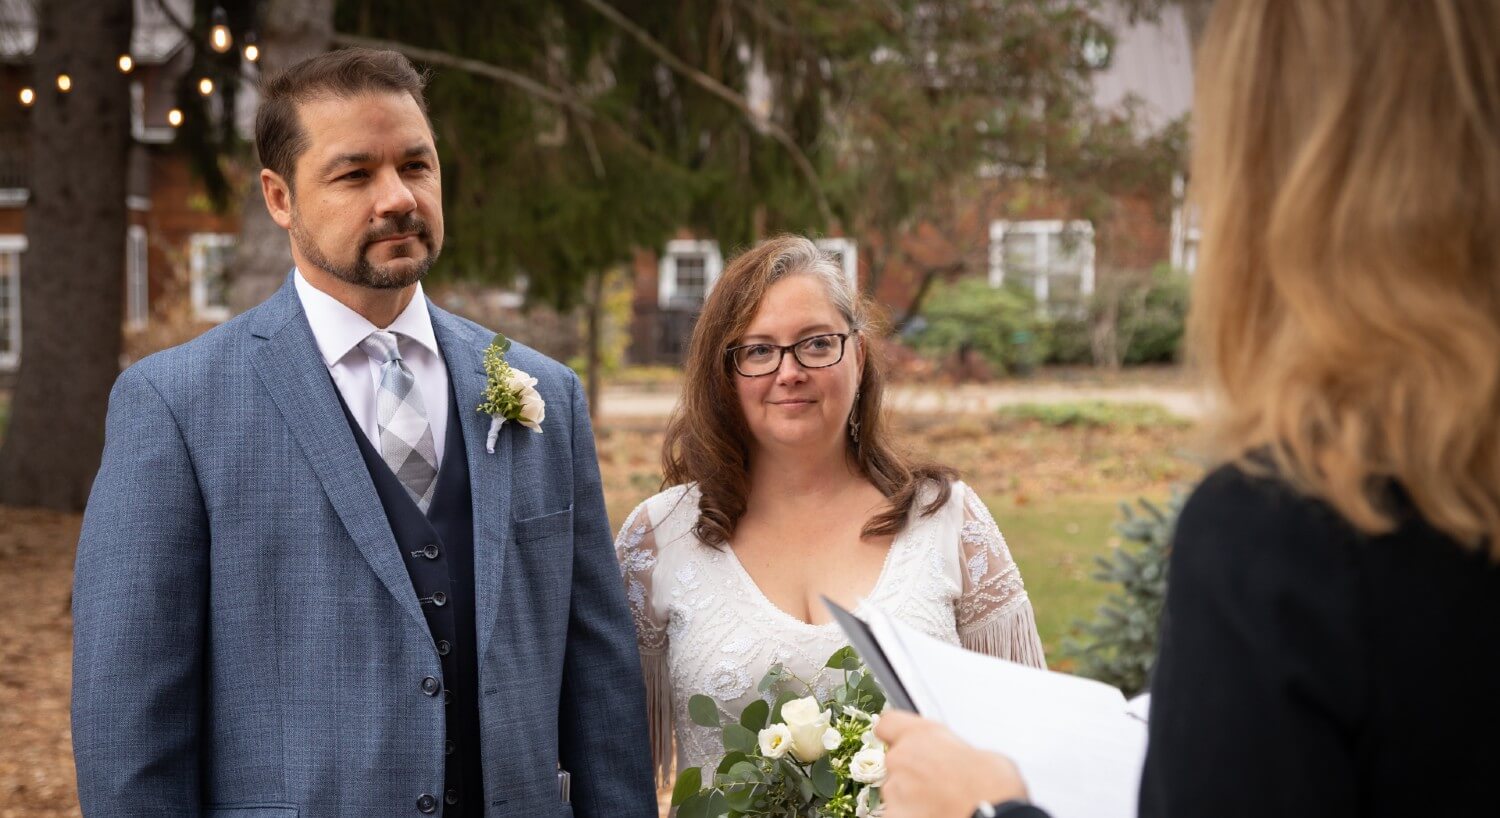 A bride and groom standing outside in front of a female officiant